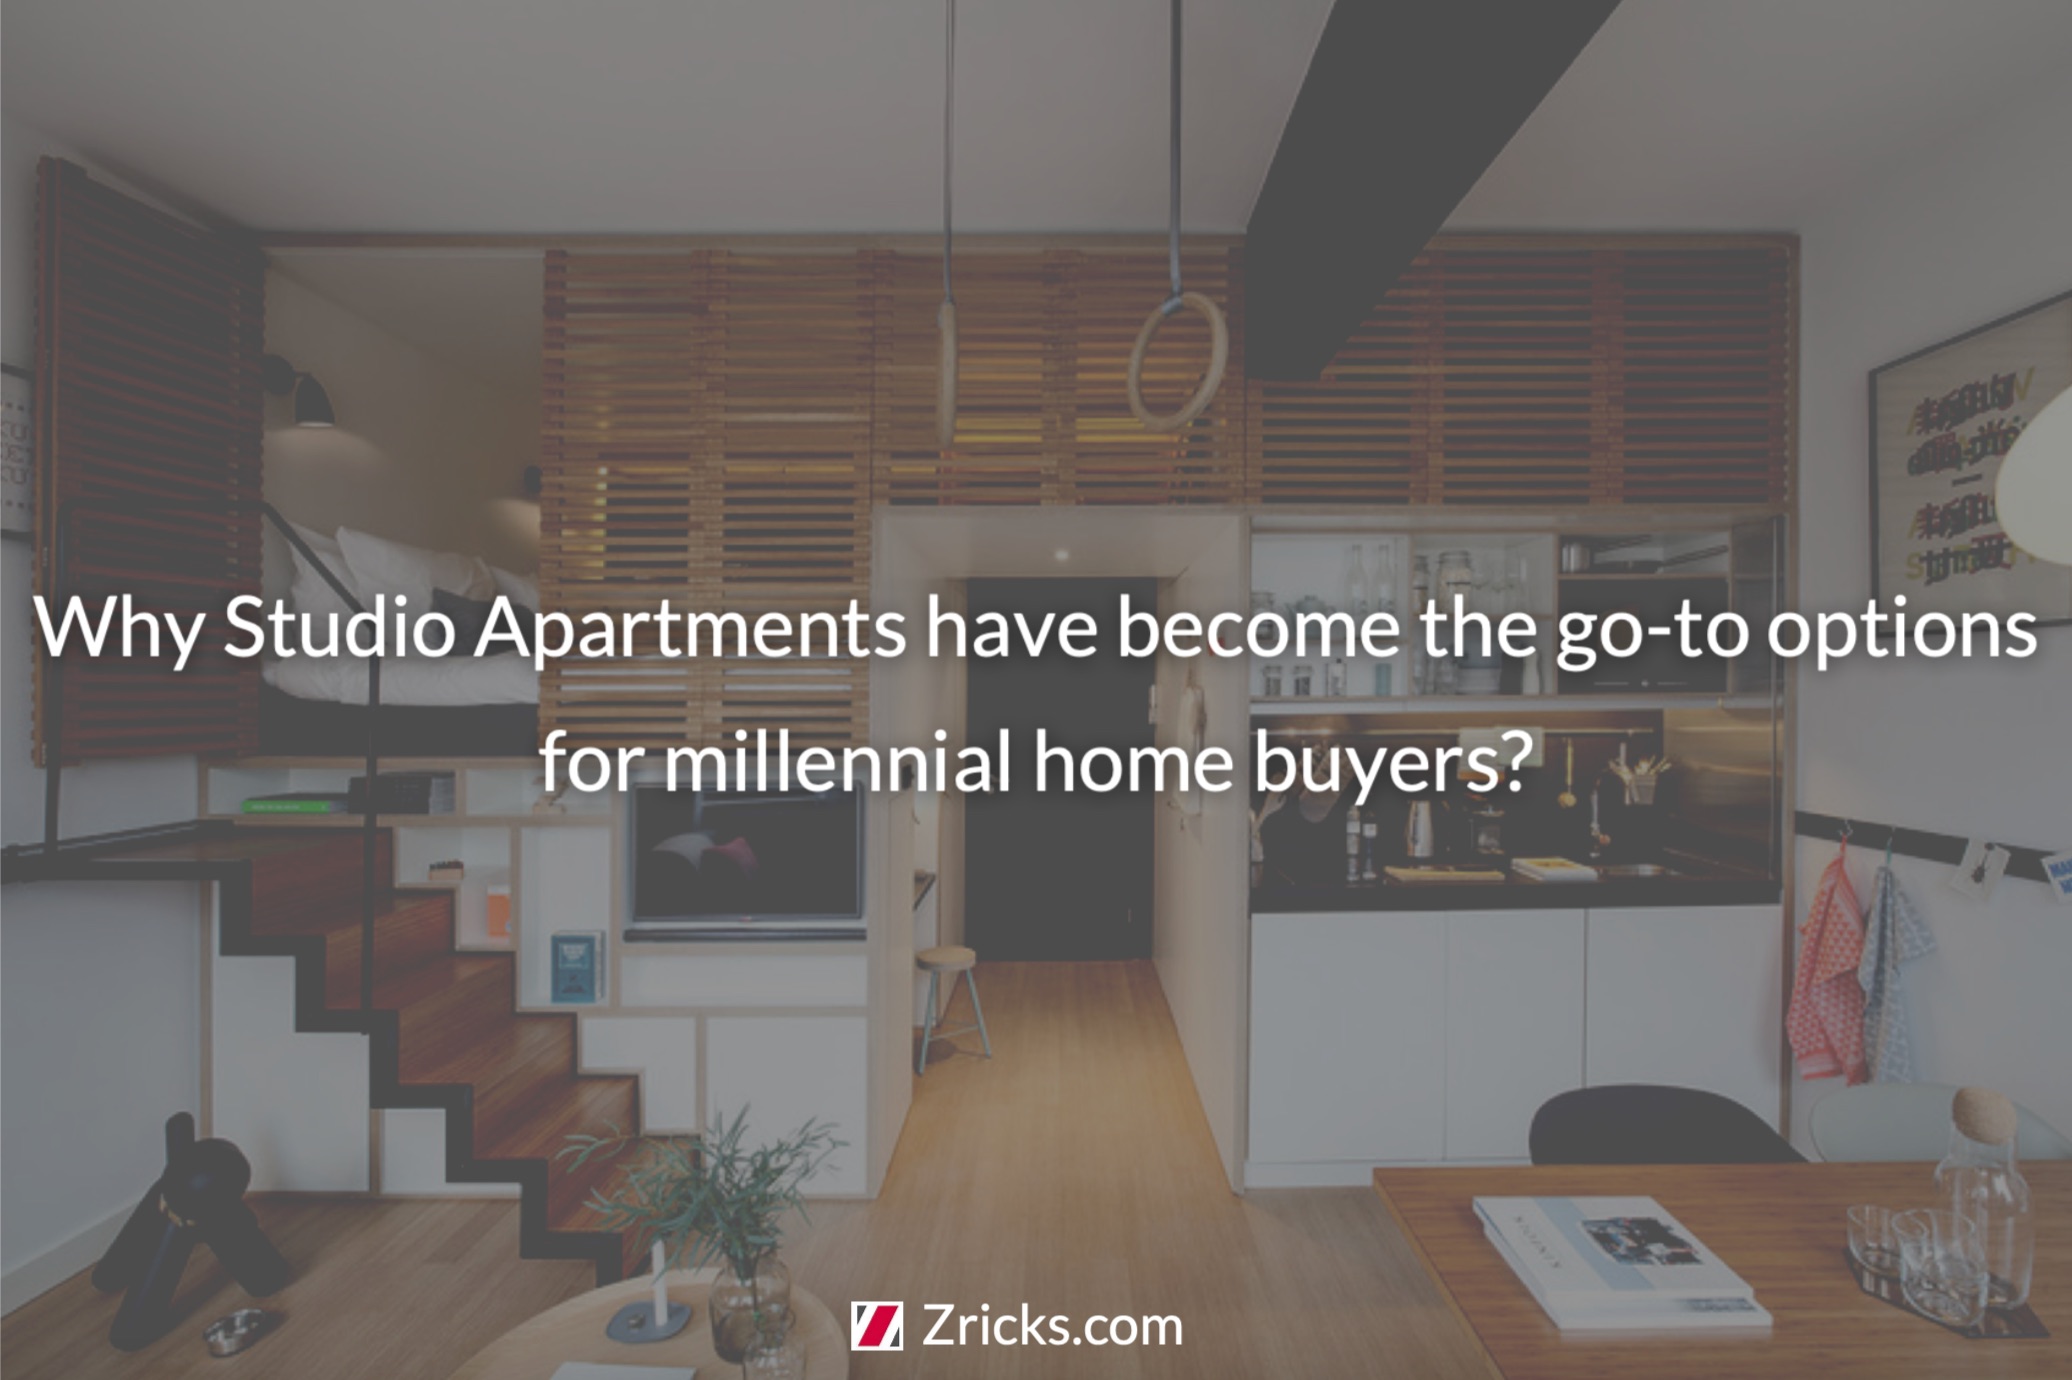 Why Studio Apartments have become the go-to options for millennial home buyers? Update